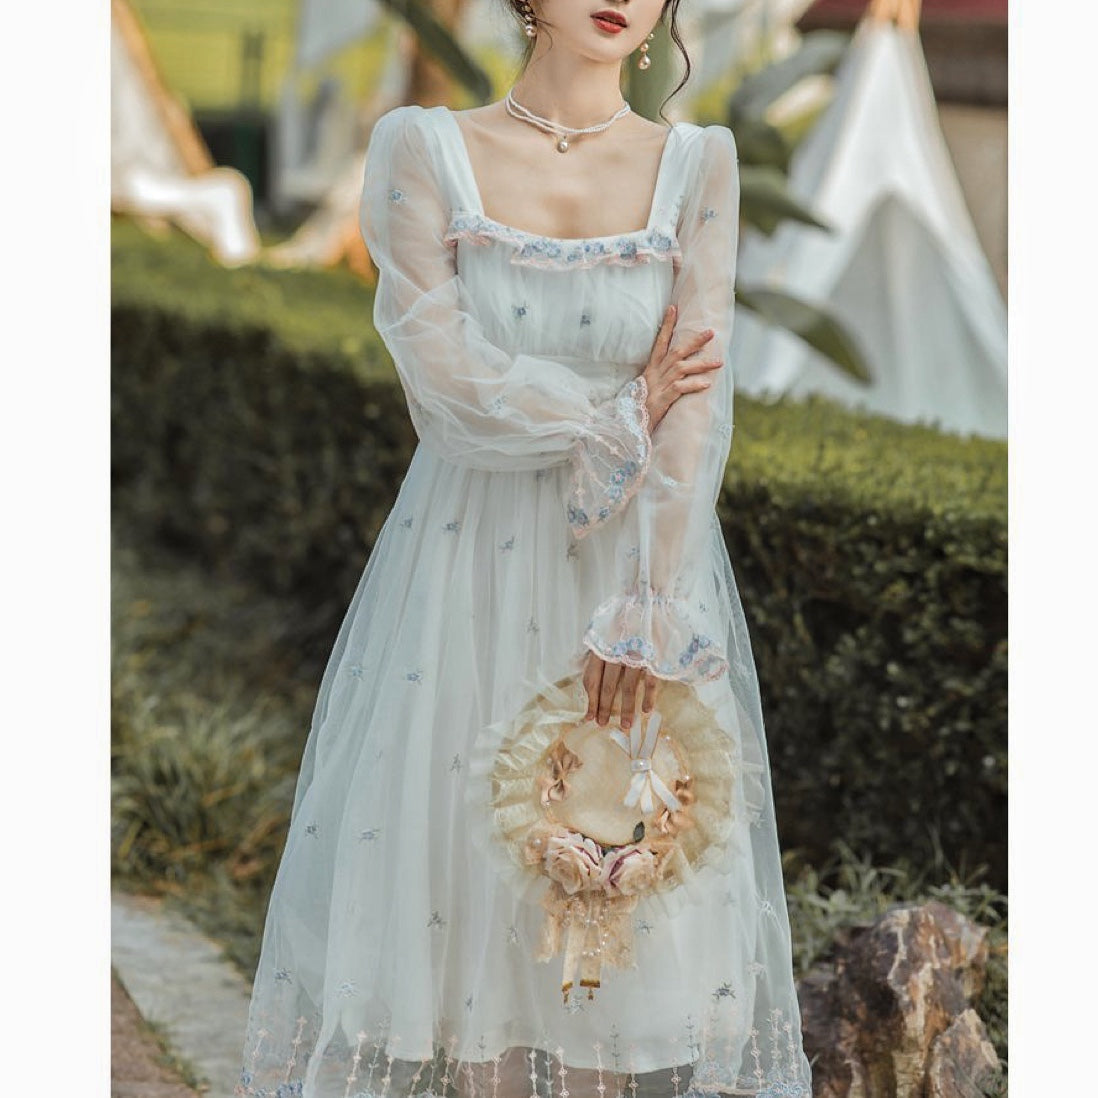 Delicate Embroidered Tulle Fairytale Princess Dress Fairycore Fashion